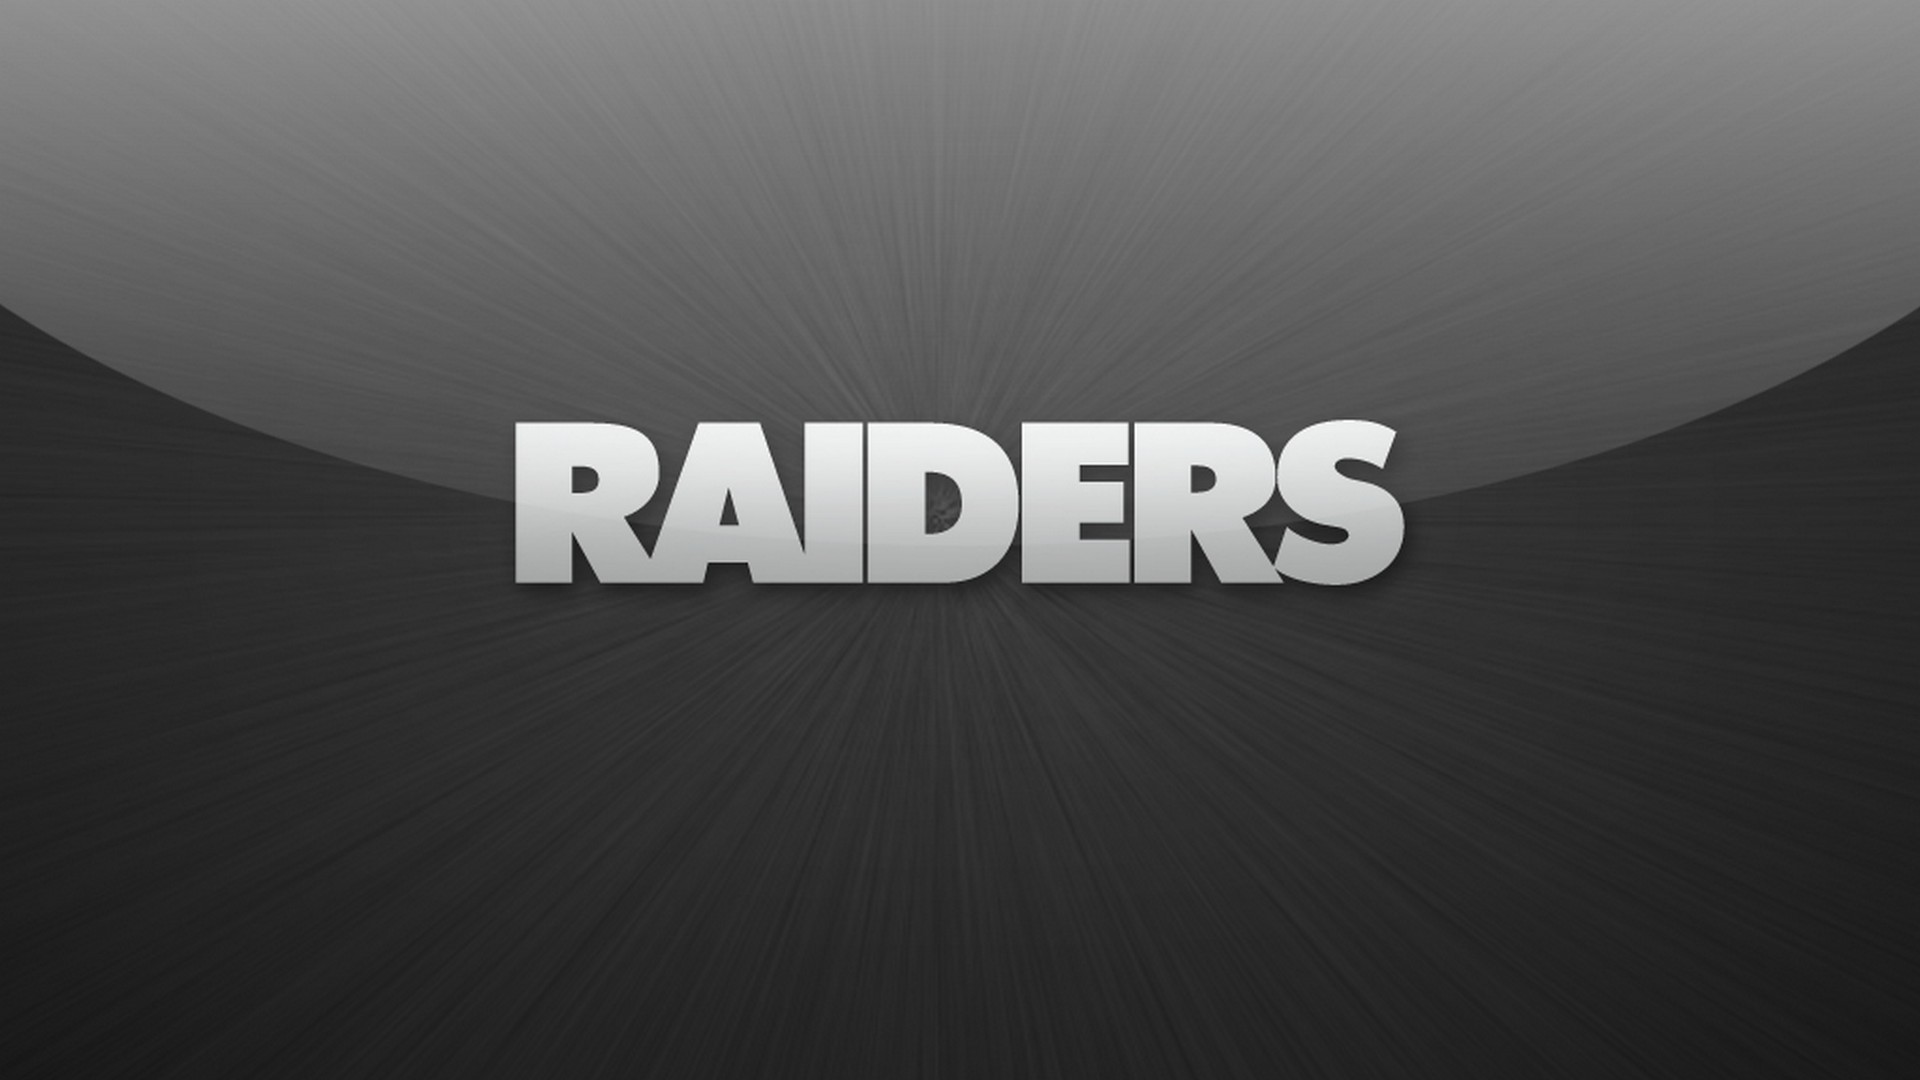 Wallpapers Oakland Raiders NFL With high-resolution 1920X1080 pixel. You can use this wallpaper for your Mac or Windows Desktop Background, iPhone, Android or Tablet and another Smartphone device